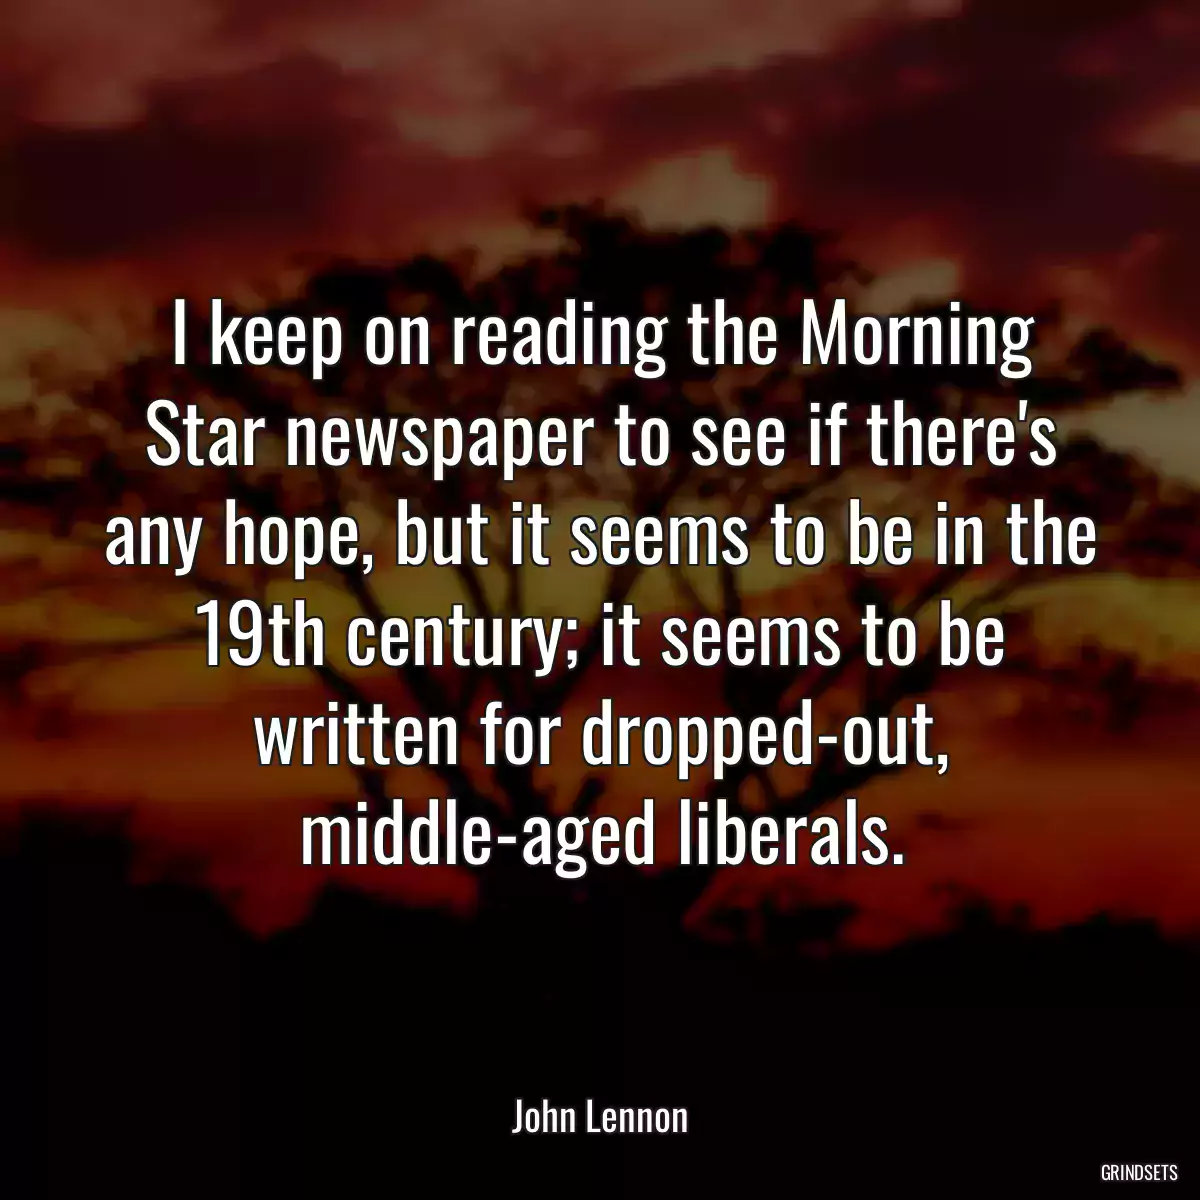 I keep on reading the Morning Star newspaper to see if there\'s any hope, but it seems to be in the 19th century; it seems to be written for dropped-out, middle-aged liberals.